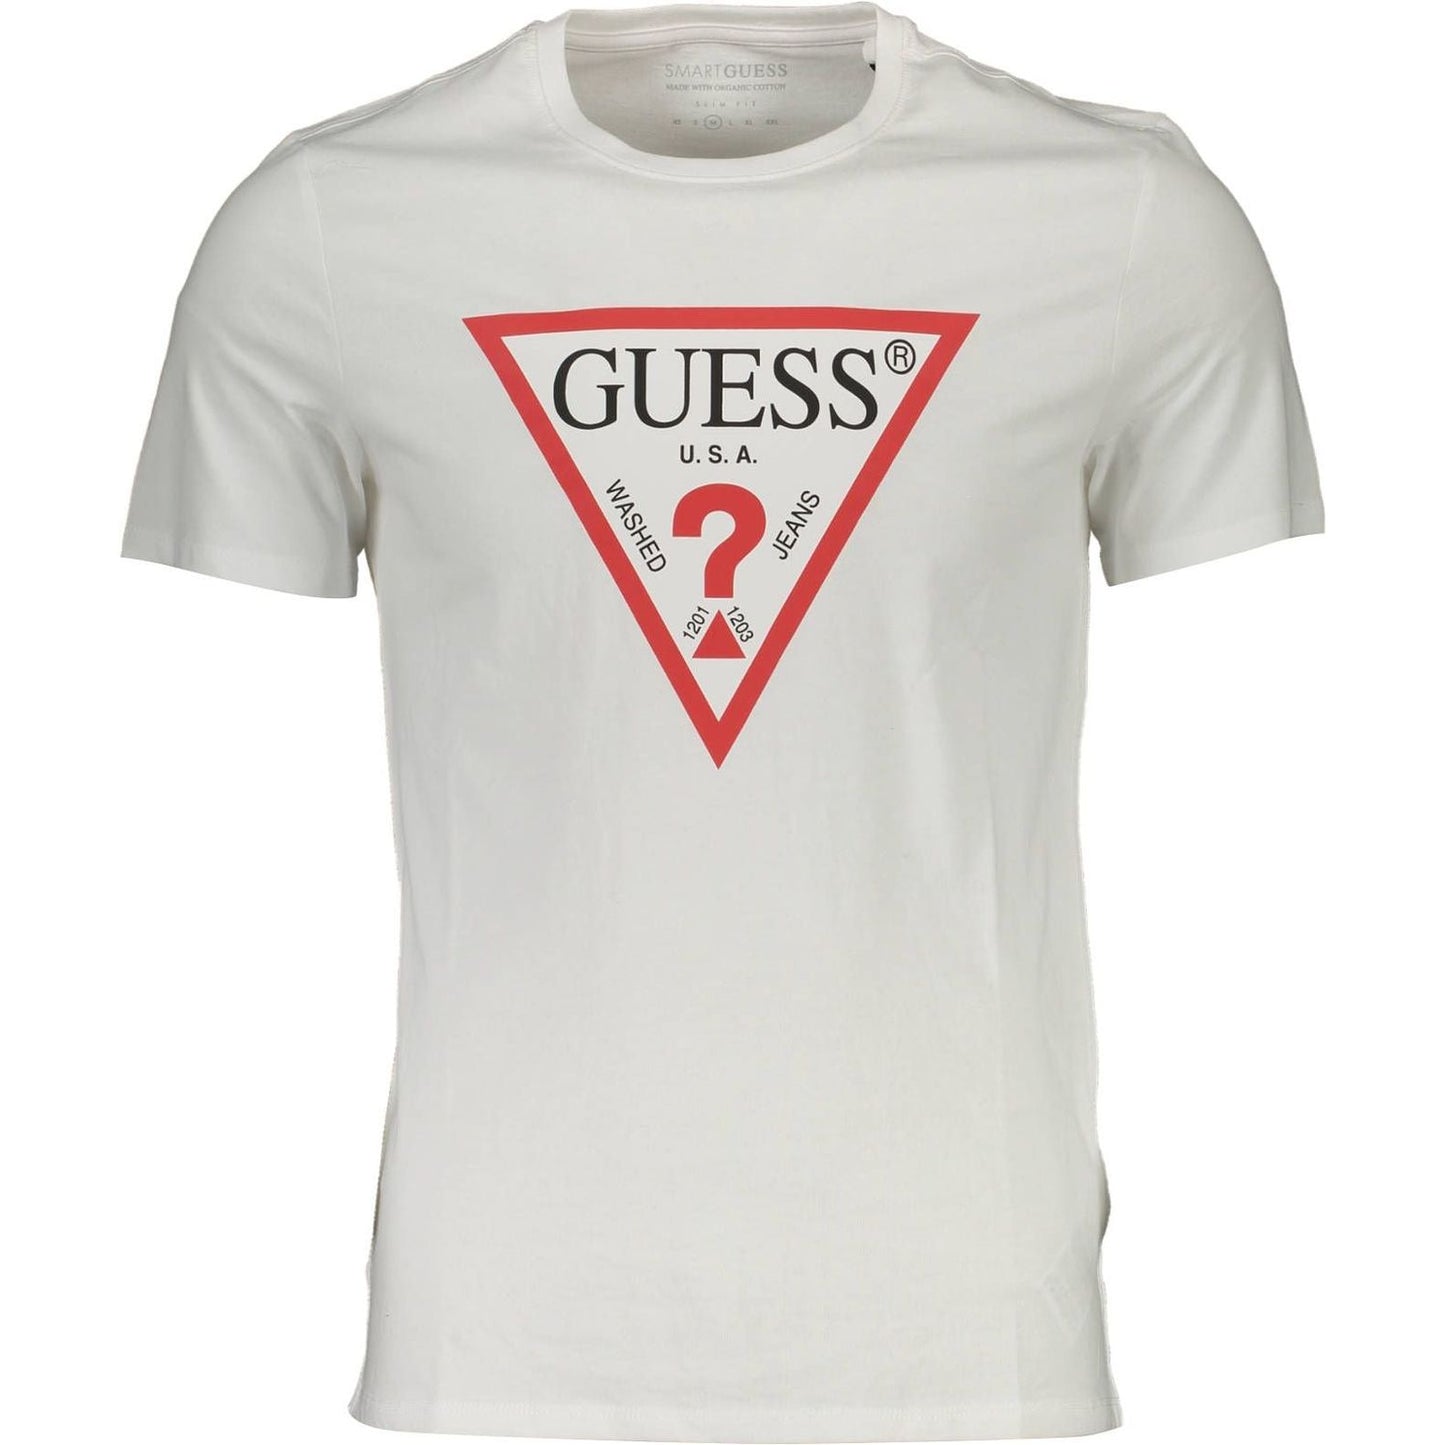 Guess Jeans Sleek Organic Slim-Fit Tee with Logo sleek-organic-slim-fit-tee-with-logo